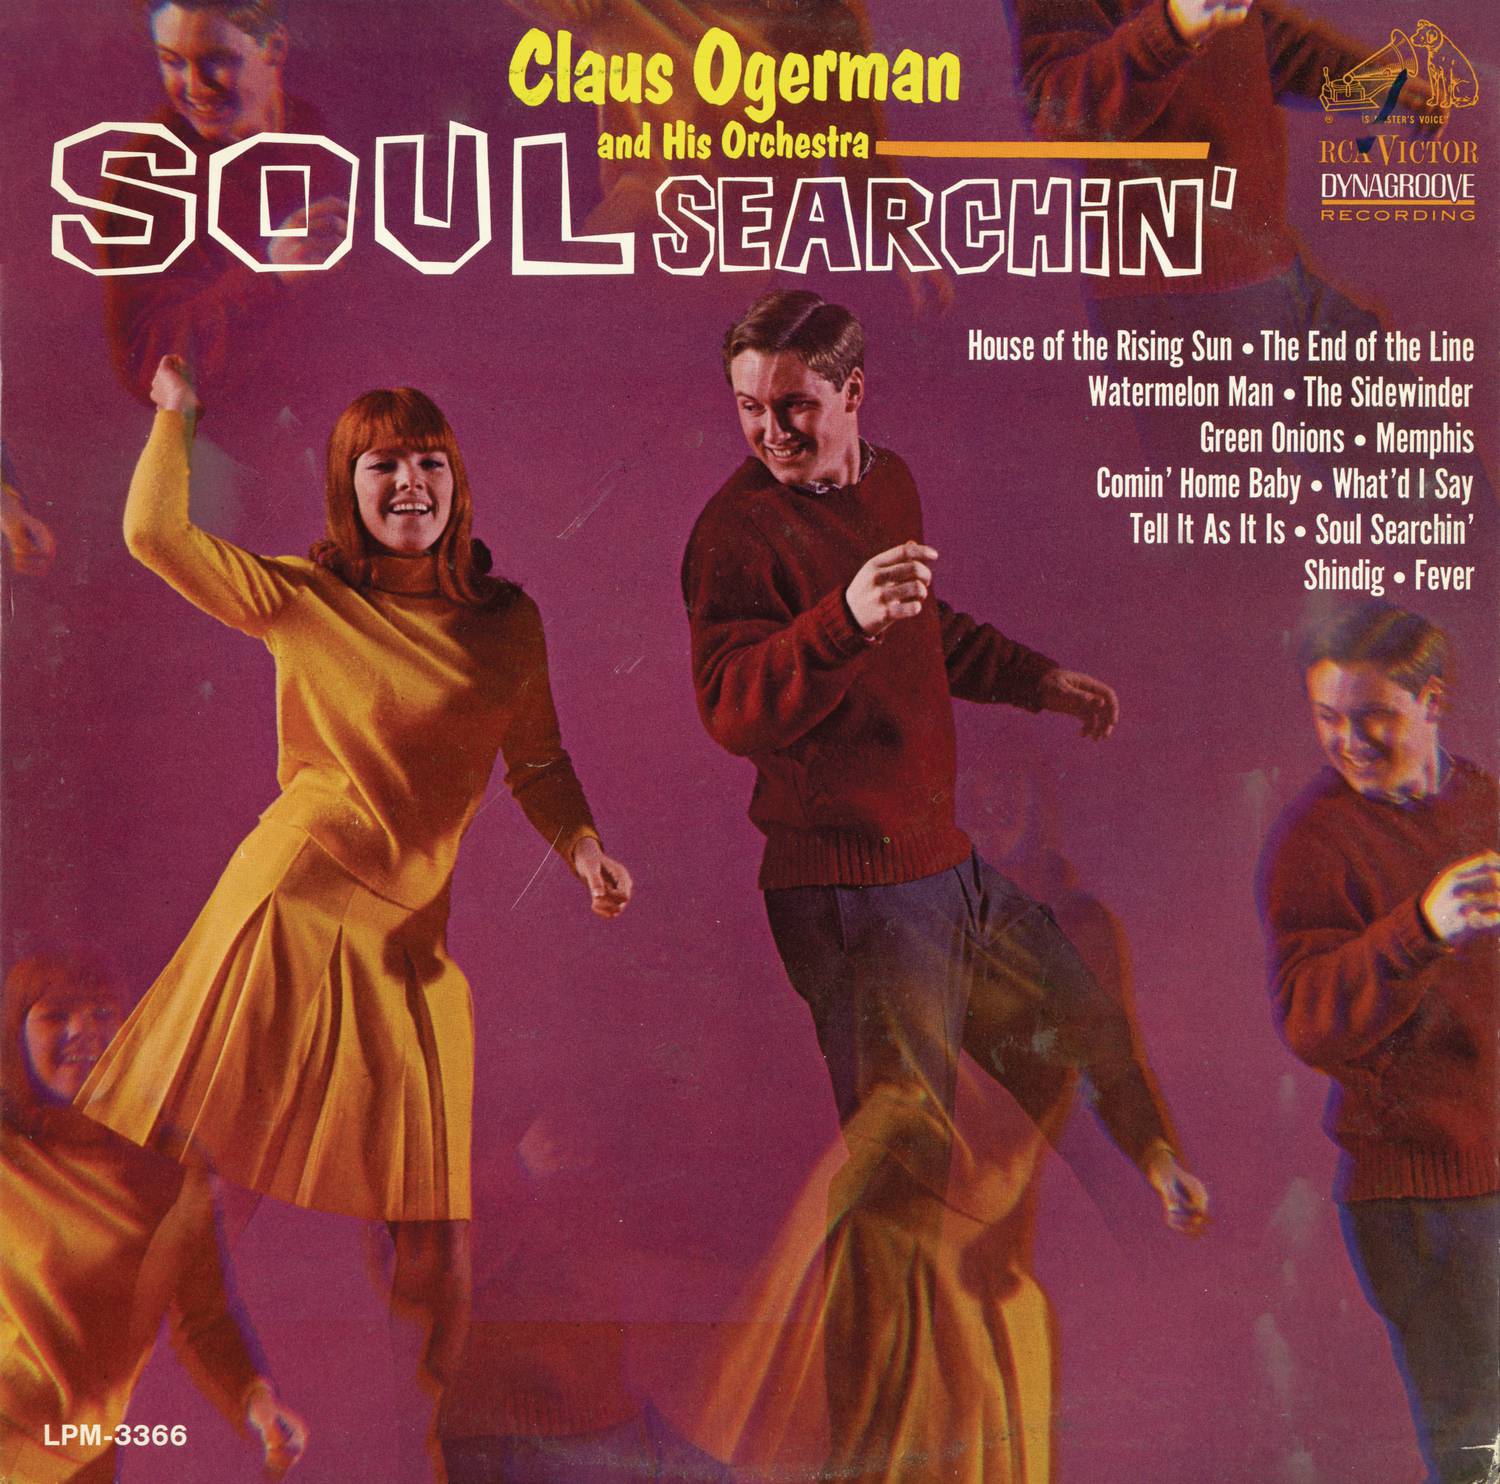 Claus Ogerman And His Orchestra - Soul Searchin’ (1965/2015) [AcousticSounds FLAC 24bit/96kHz]